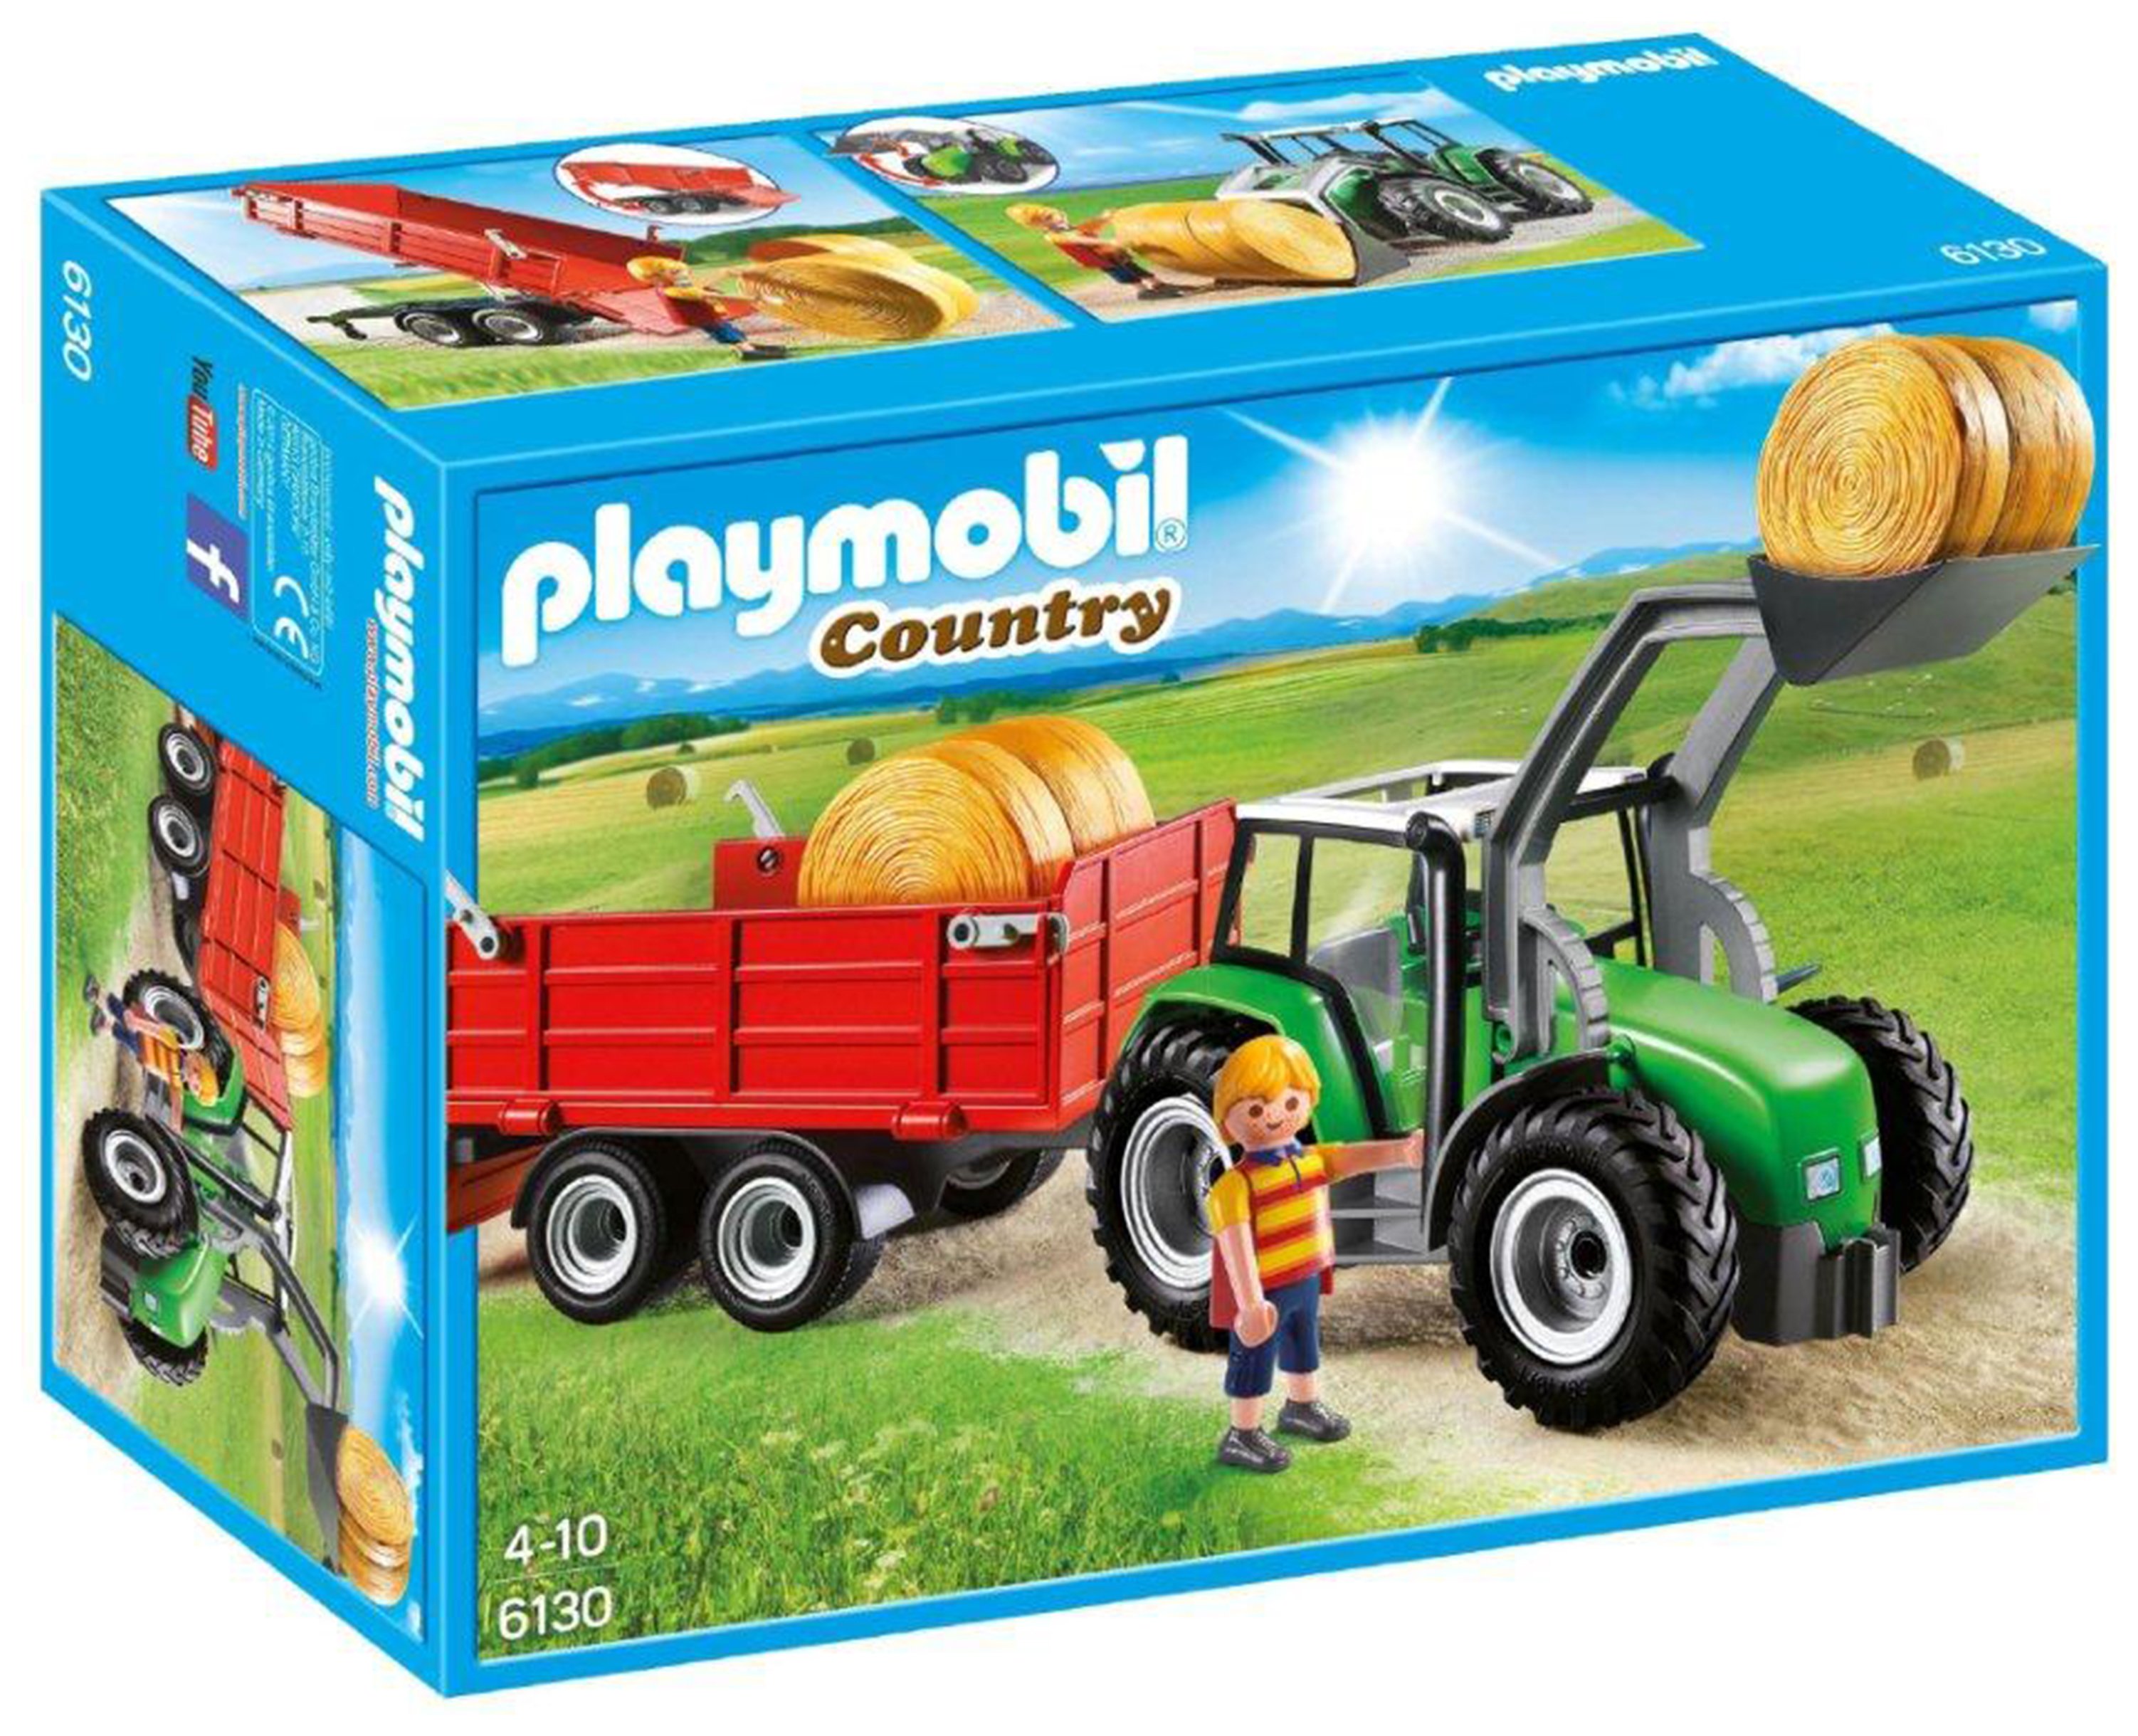 Playmobil 6130 Country Large Tractor with Trailer.